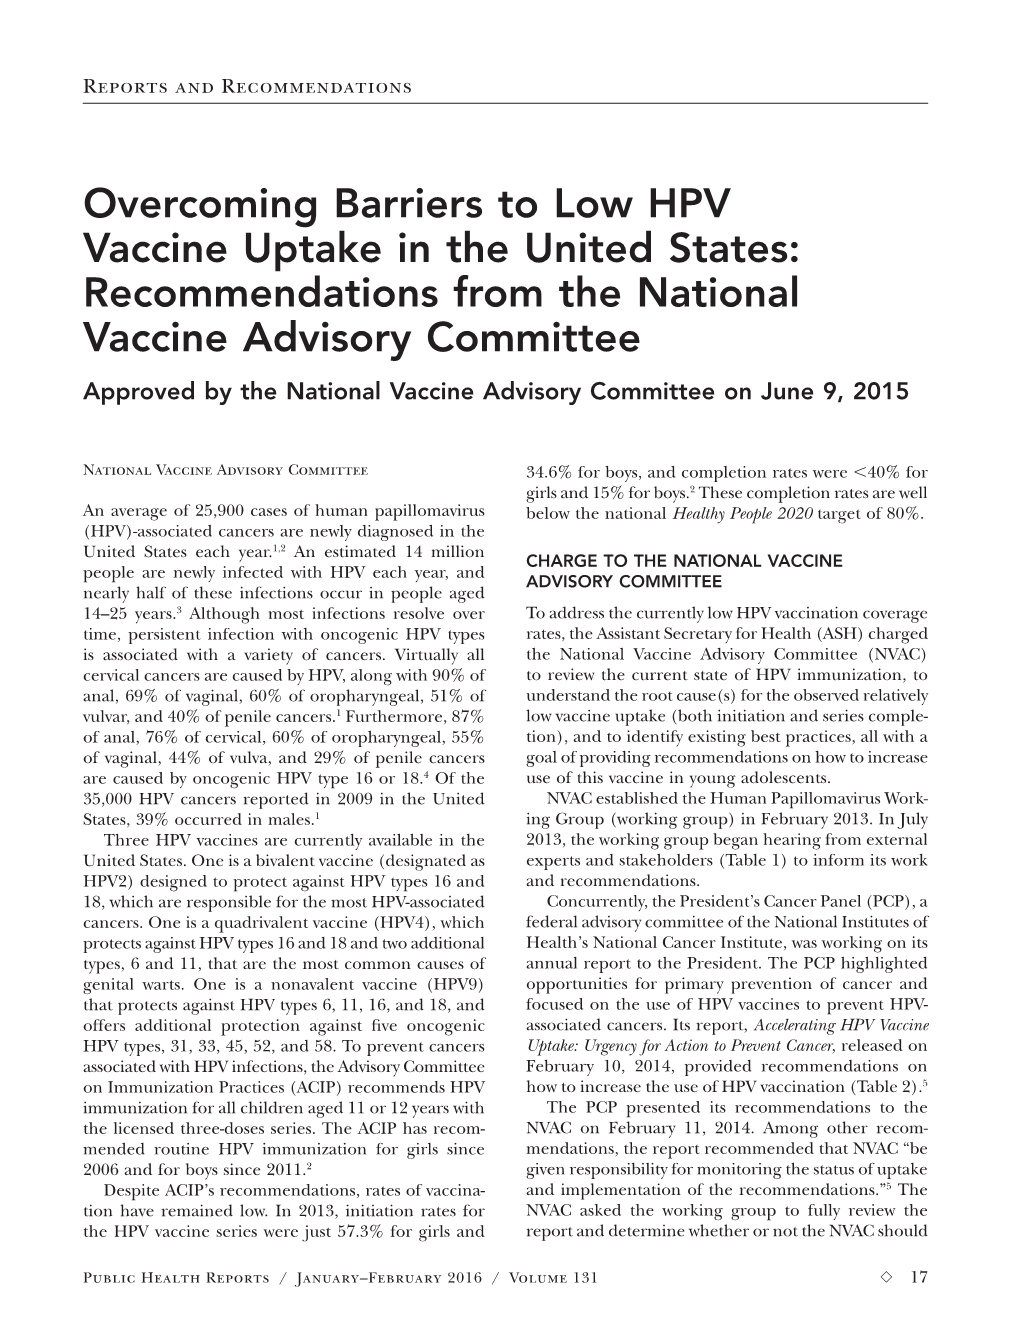 Overcoming Barriers to Low HPV Vaccine Uptake in the United States